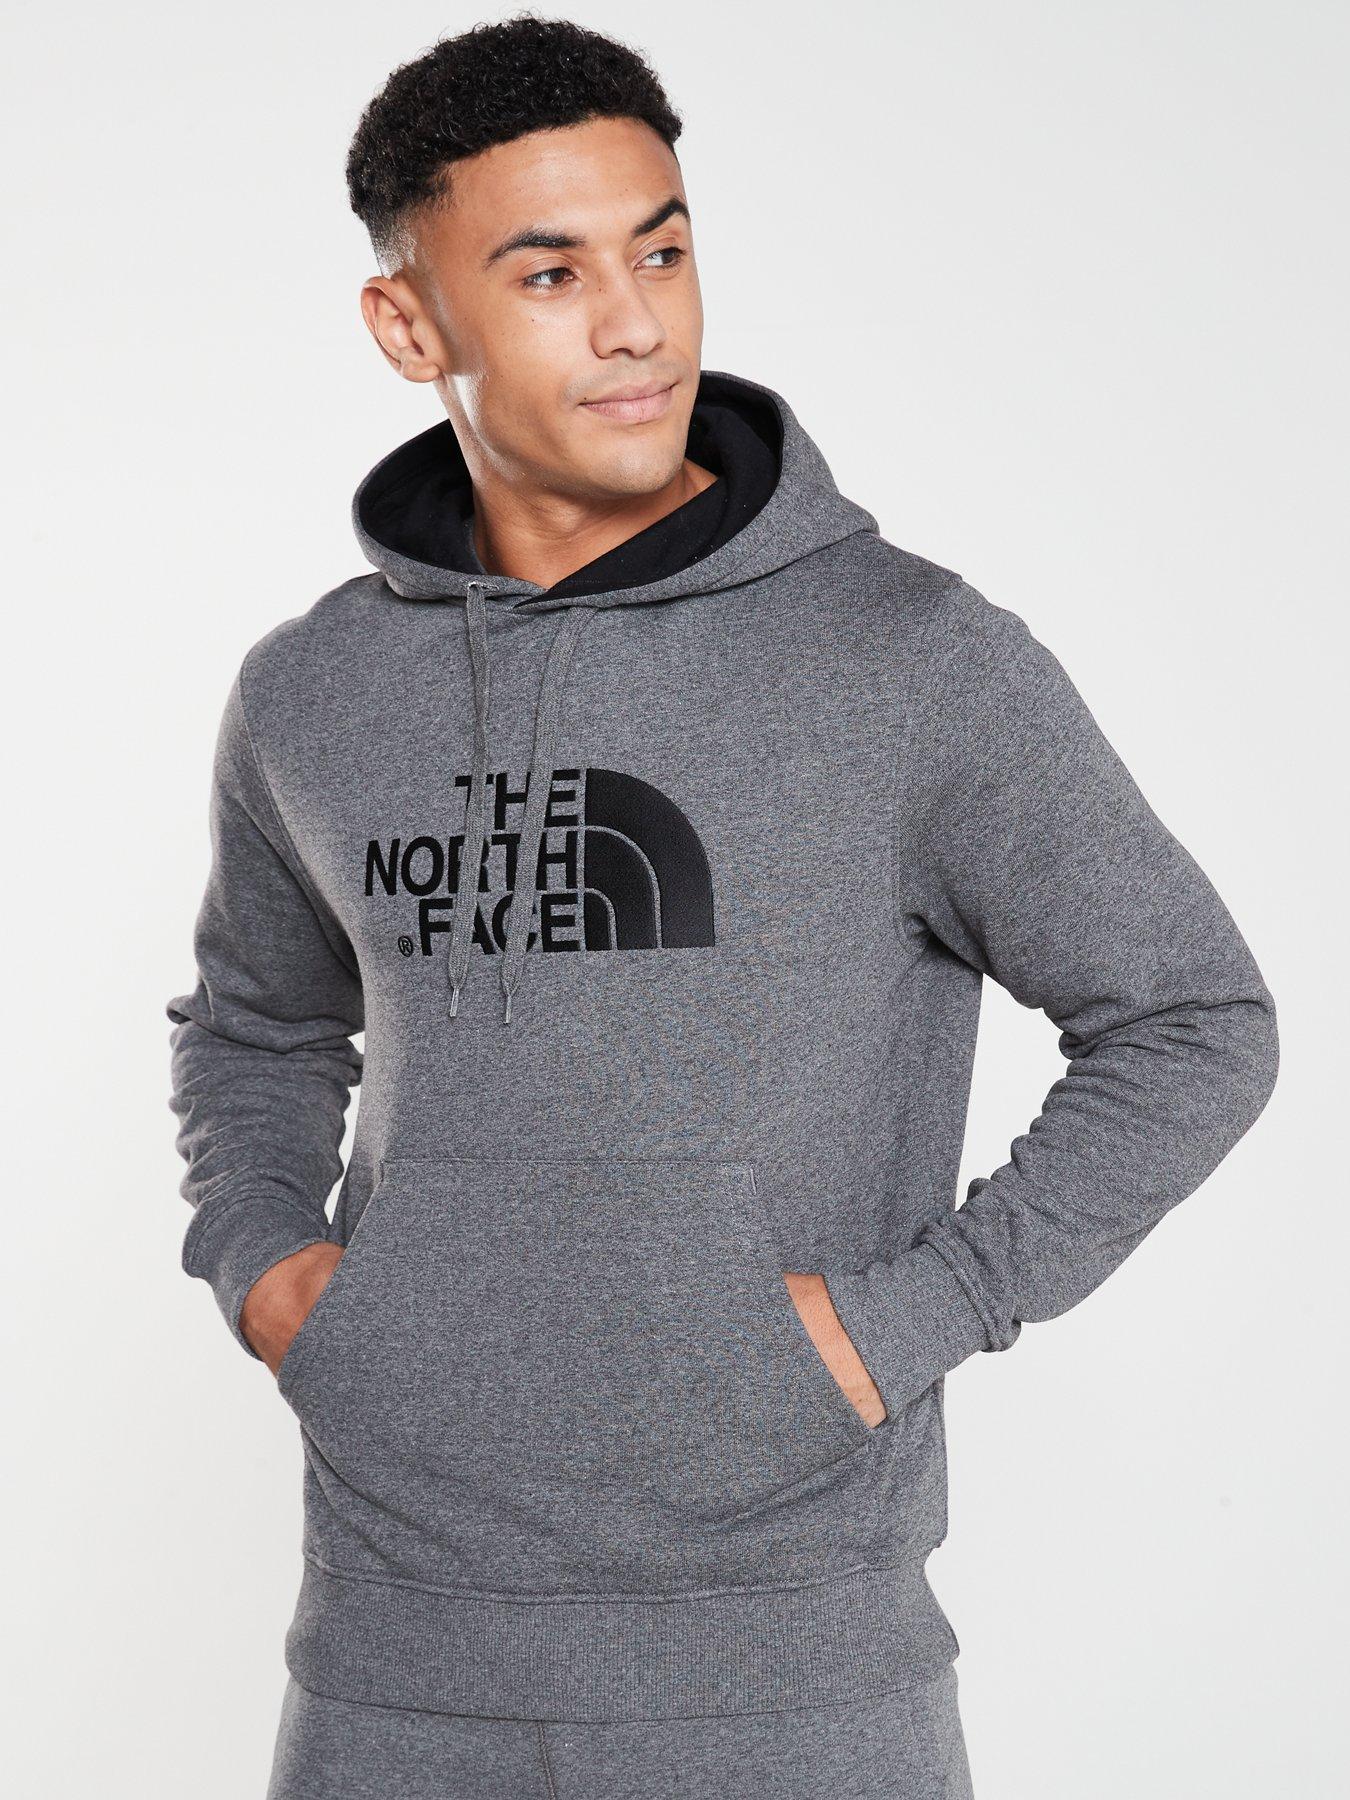 the north face sale mens uk